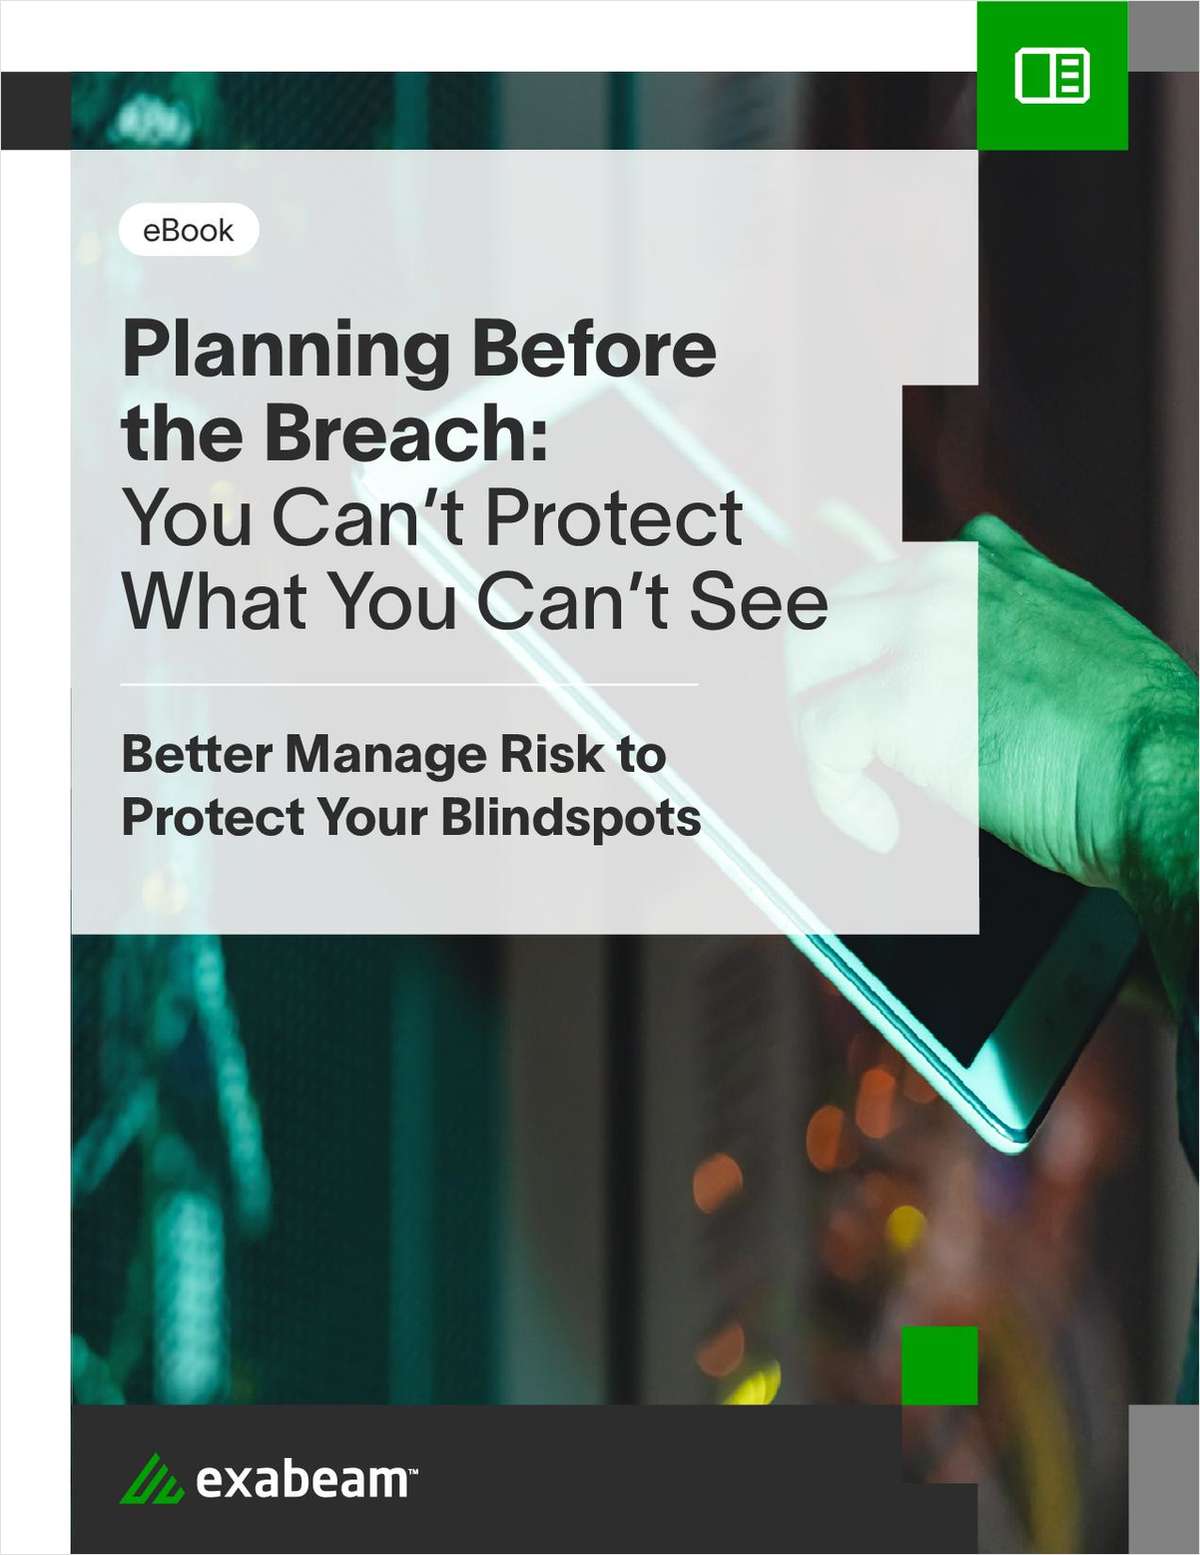 Planning Before the Breach: You Can't Protect What You Can't See